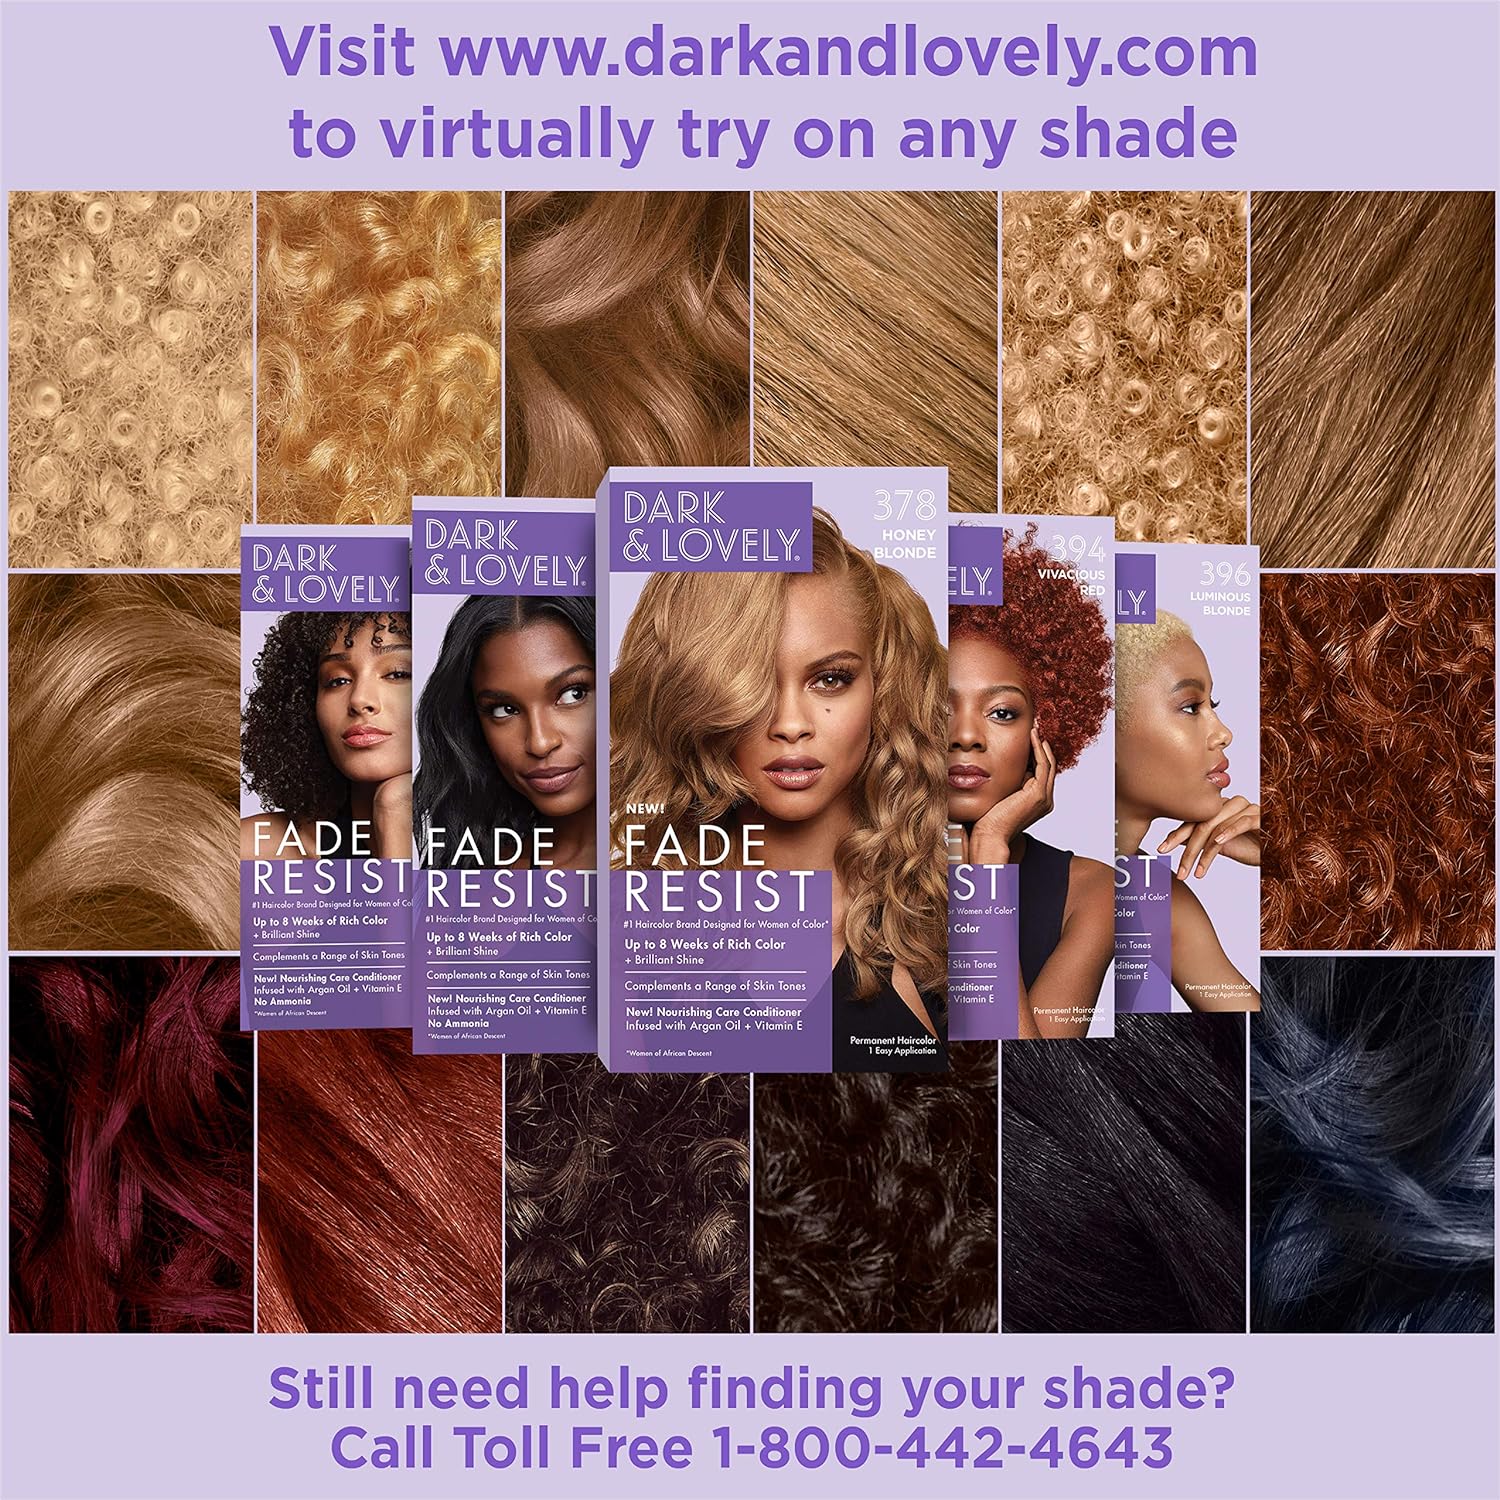 SoftSheen-Carson Dark and Lovely Fade Resist Rich Conditioning Hair Color, Permanent Hair Color, Up To 100 percent Gray Coverage, Brilliant Shine with Argan Oil and Vitamin E, Brown Sable : Chemical Hair Dyes : Beauty & Personal Care